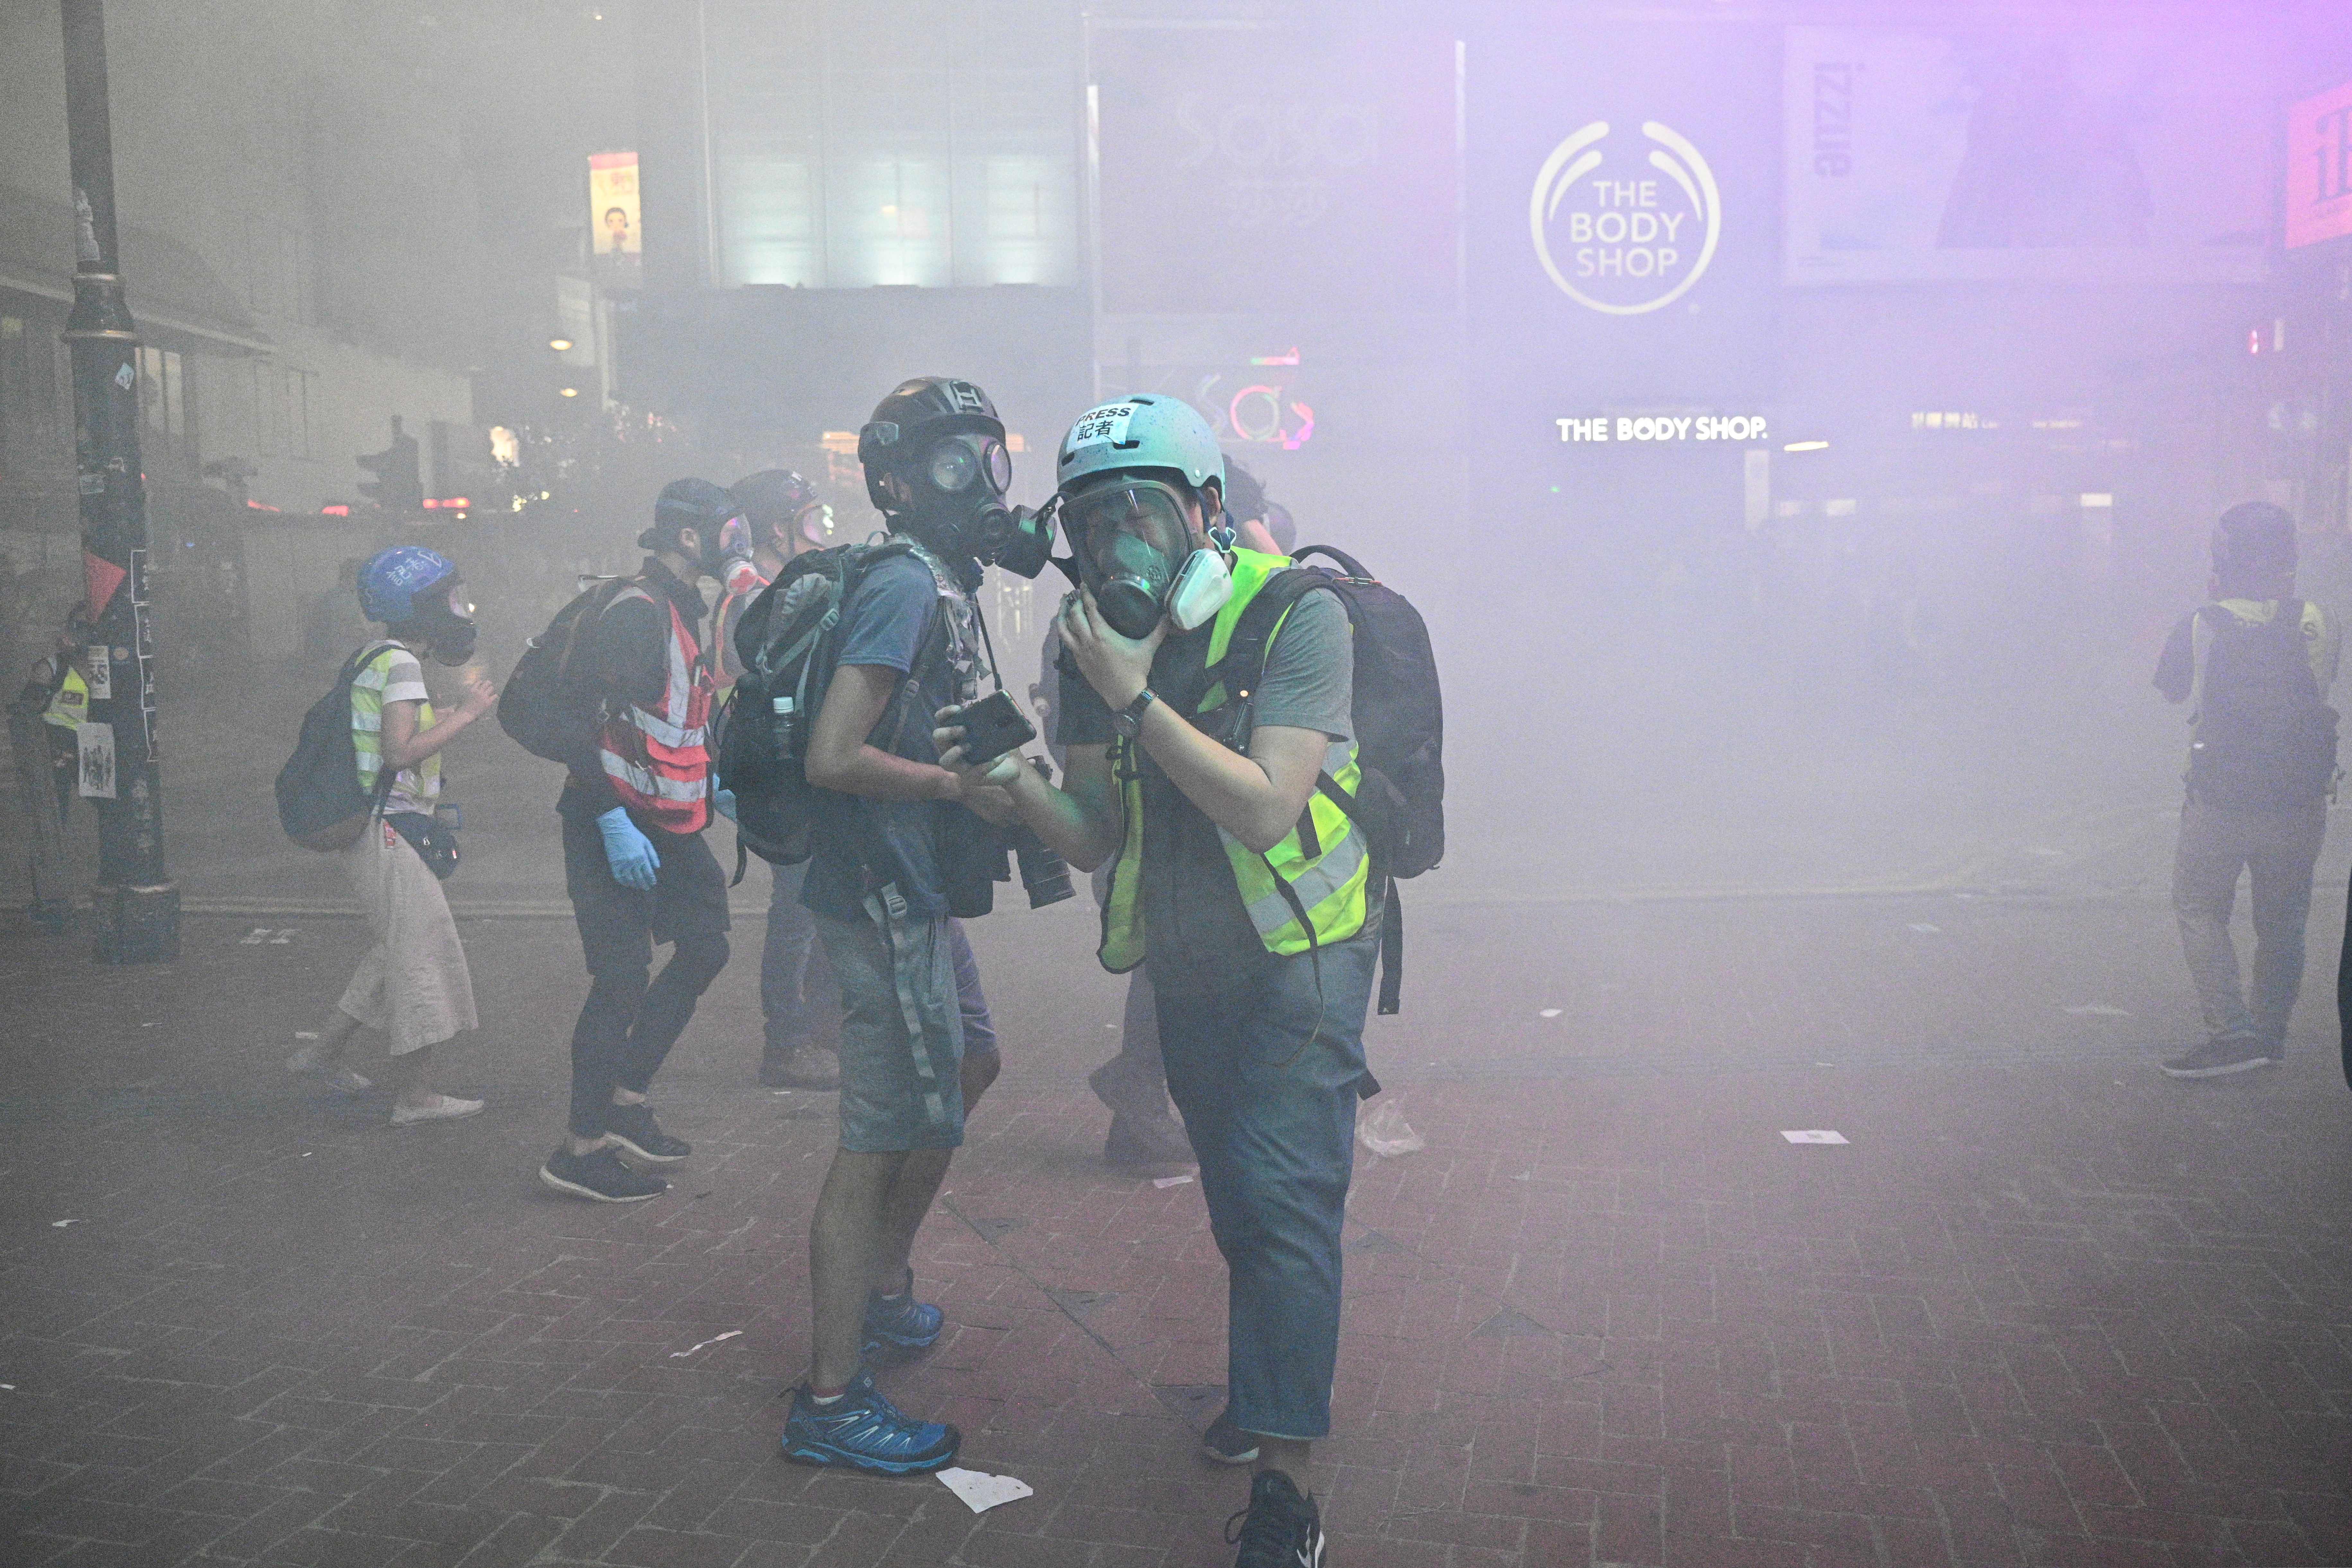 Police was firing tear gas at the protesters. 